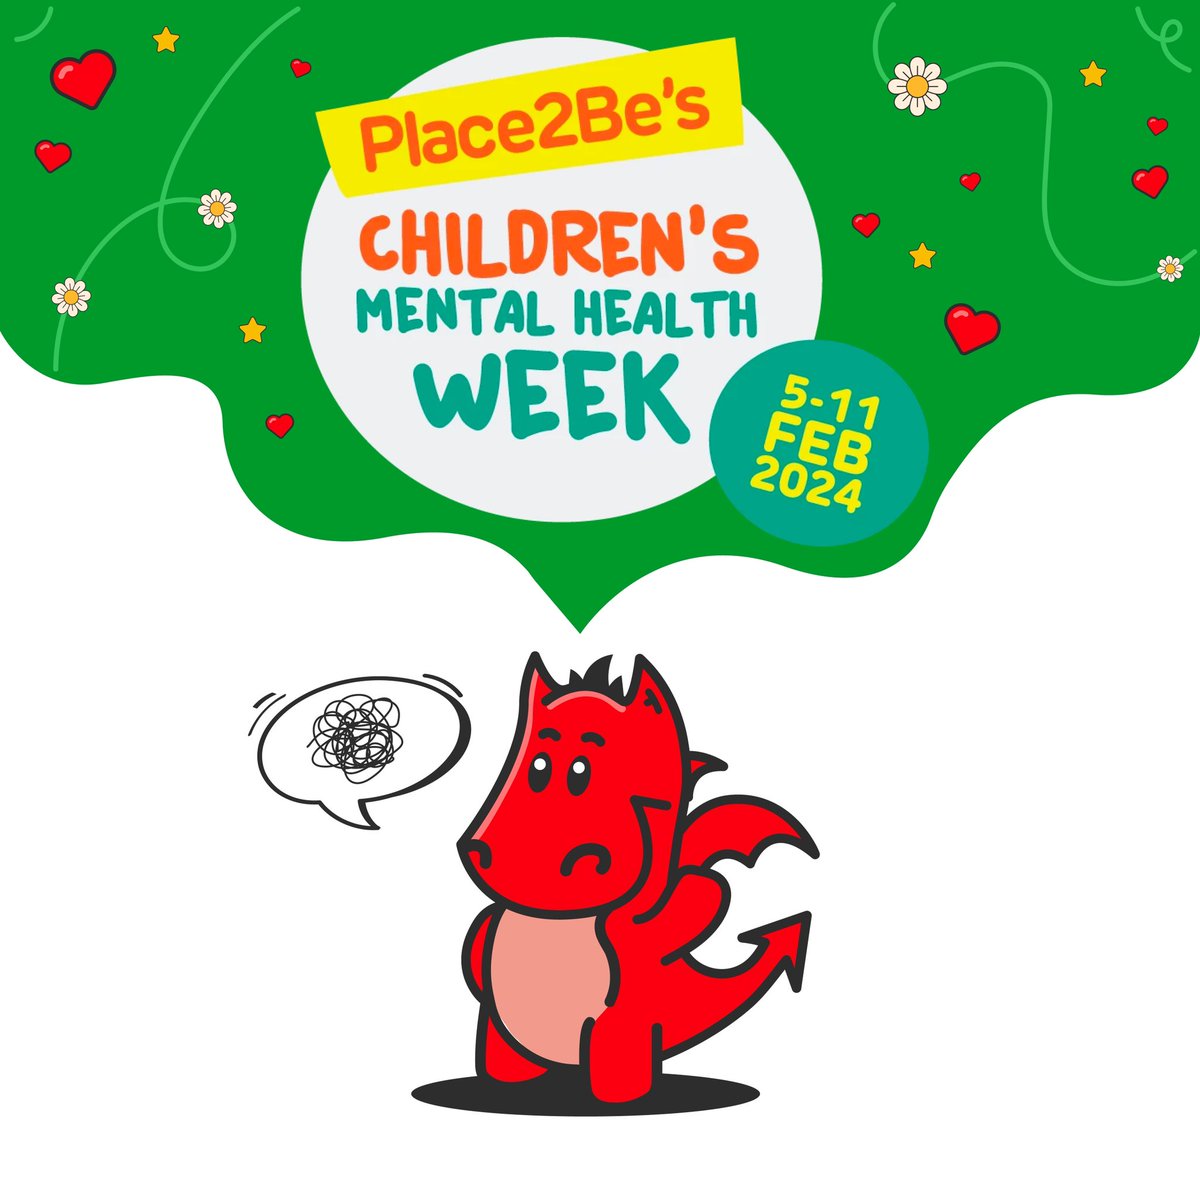 'Children’s Mental Health Week'!
Take a look at their resources for primary schools, secondary and high schools, families, parents and carers. lnkd.in/eCD_XZb9

#childrenmentalhealth #bekind #myvoicematters #place2be